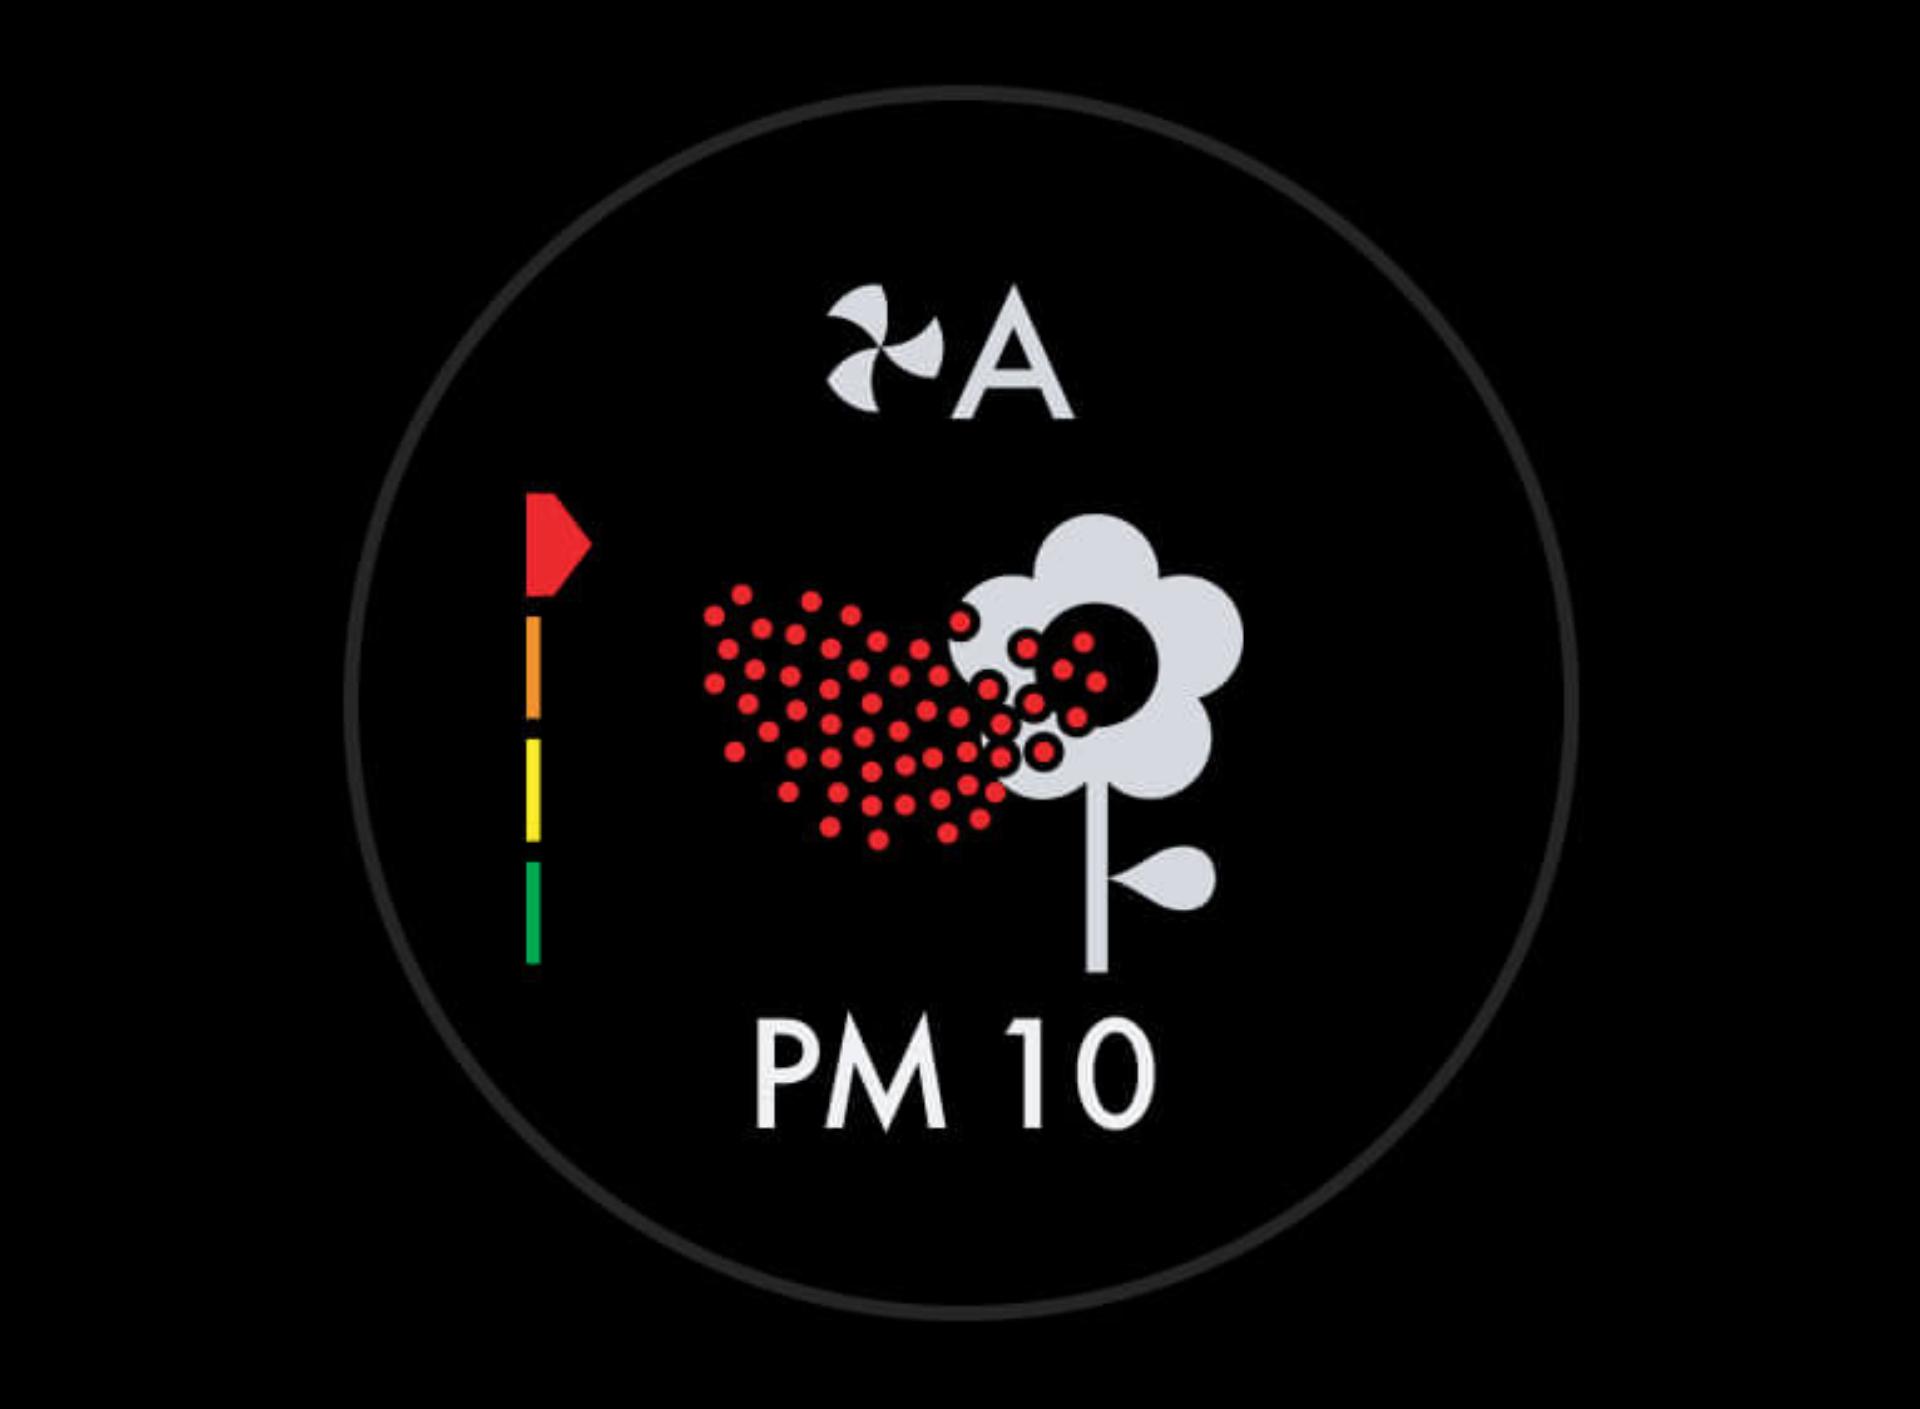 The LCD screen's icons showing different levels of pollutants